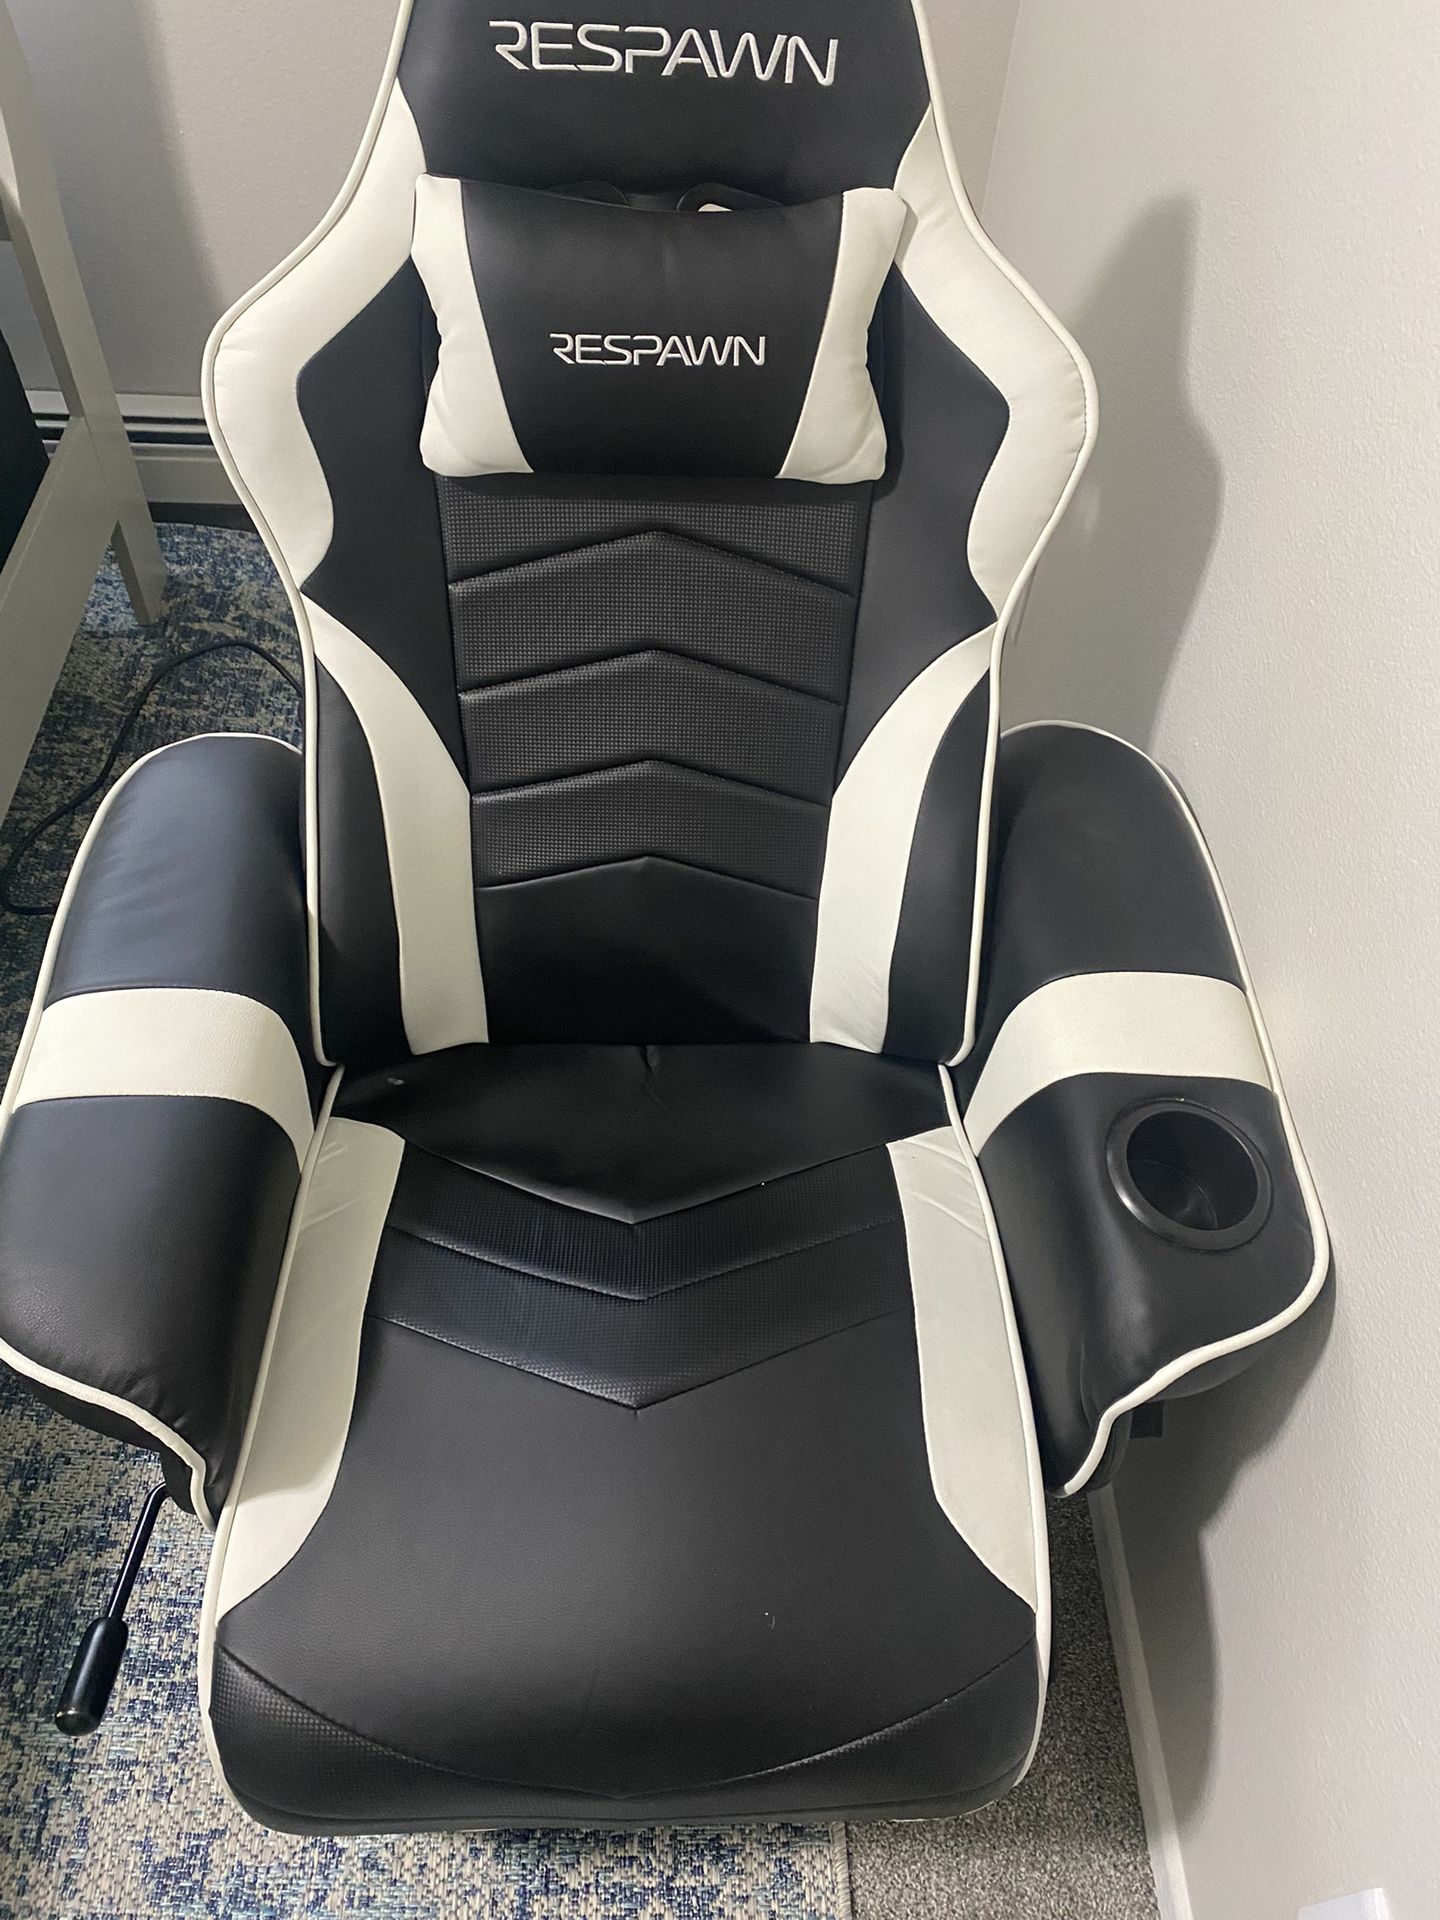 Respawn RSP-900 Racing Style, Reclining Gaming Chair